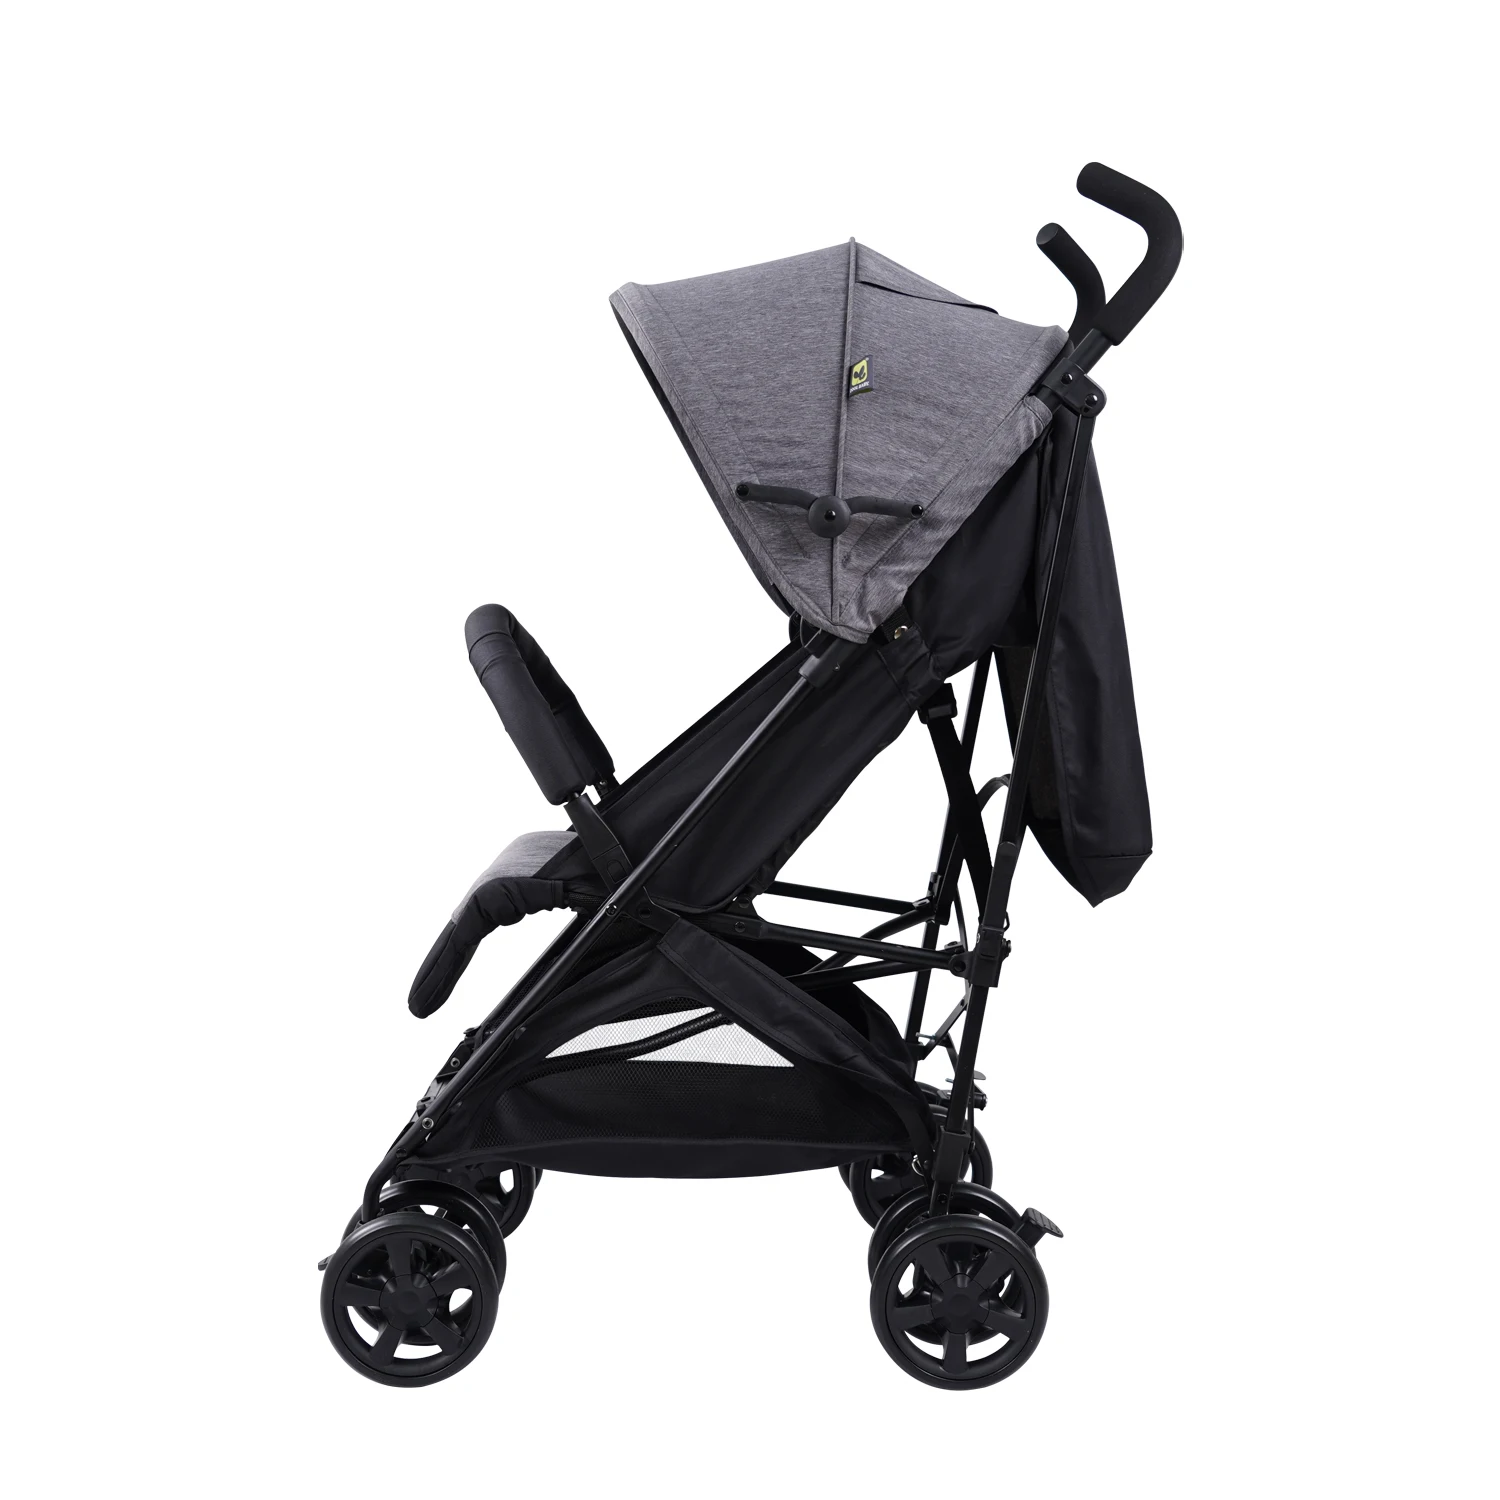 3 in 1 compact lightweight baby stroller/carriage